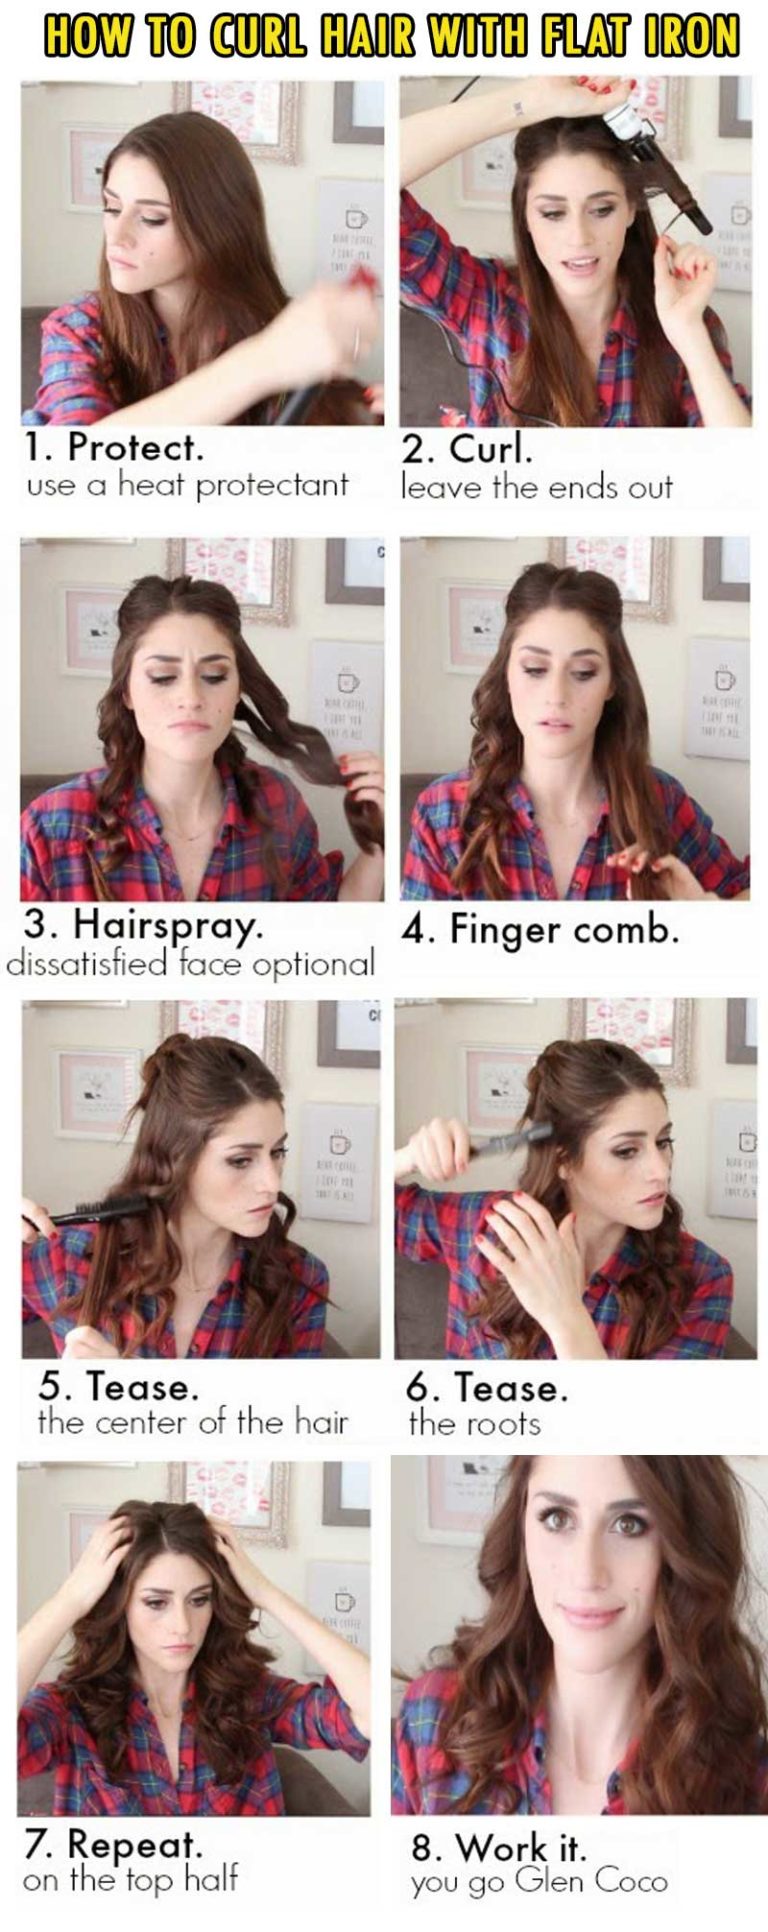 How to Curl Hair with Flat Iron - Step by Step Guide